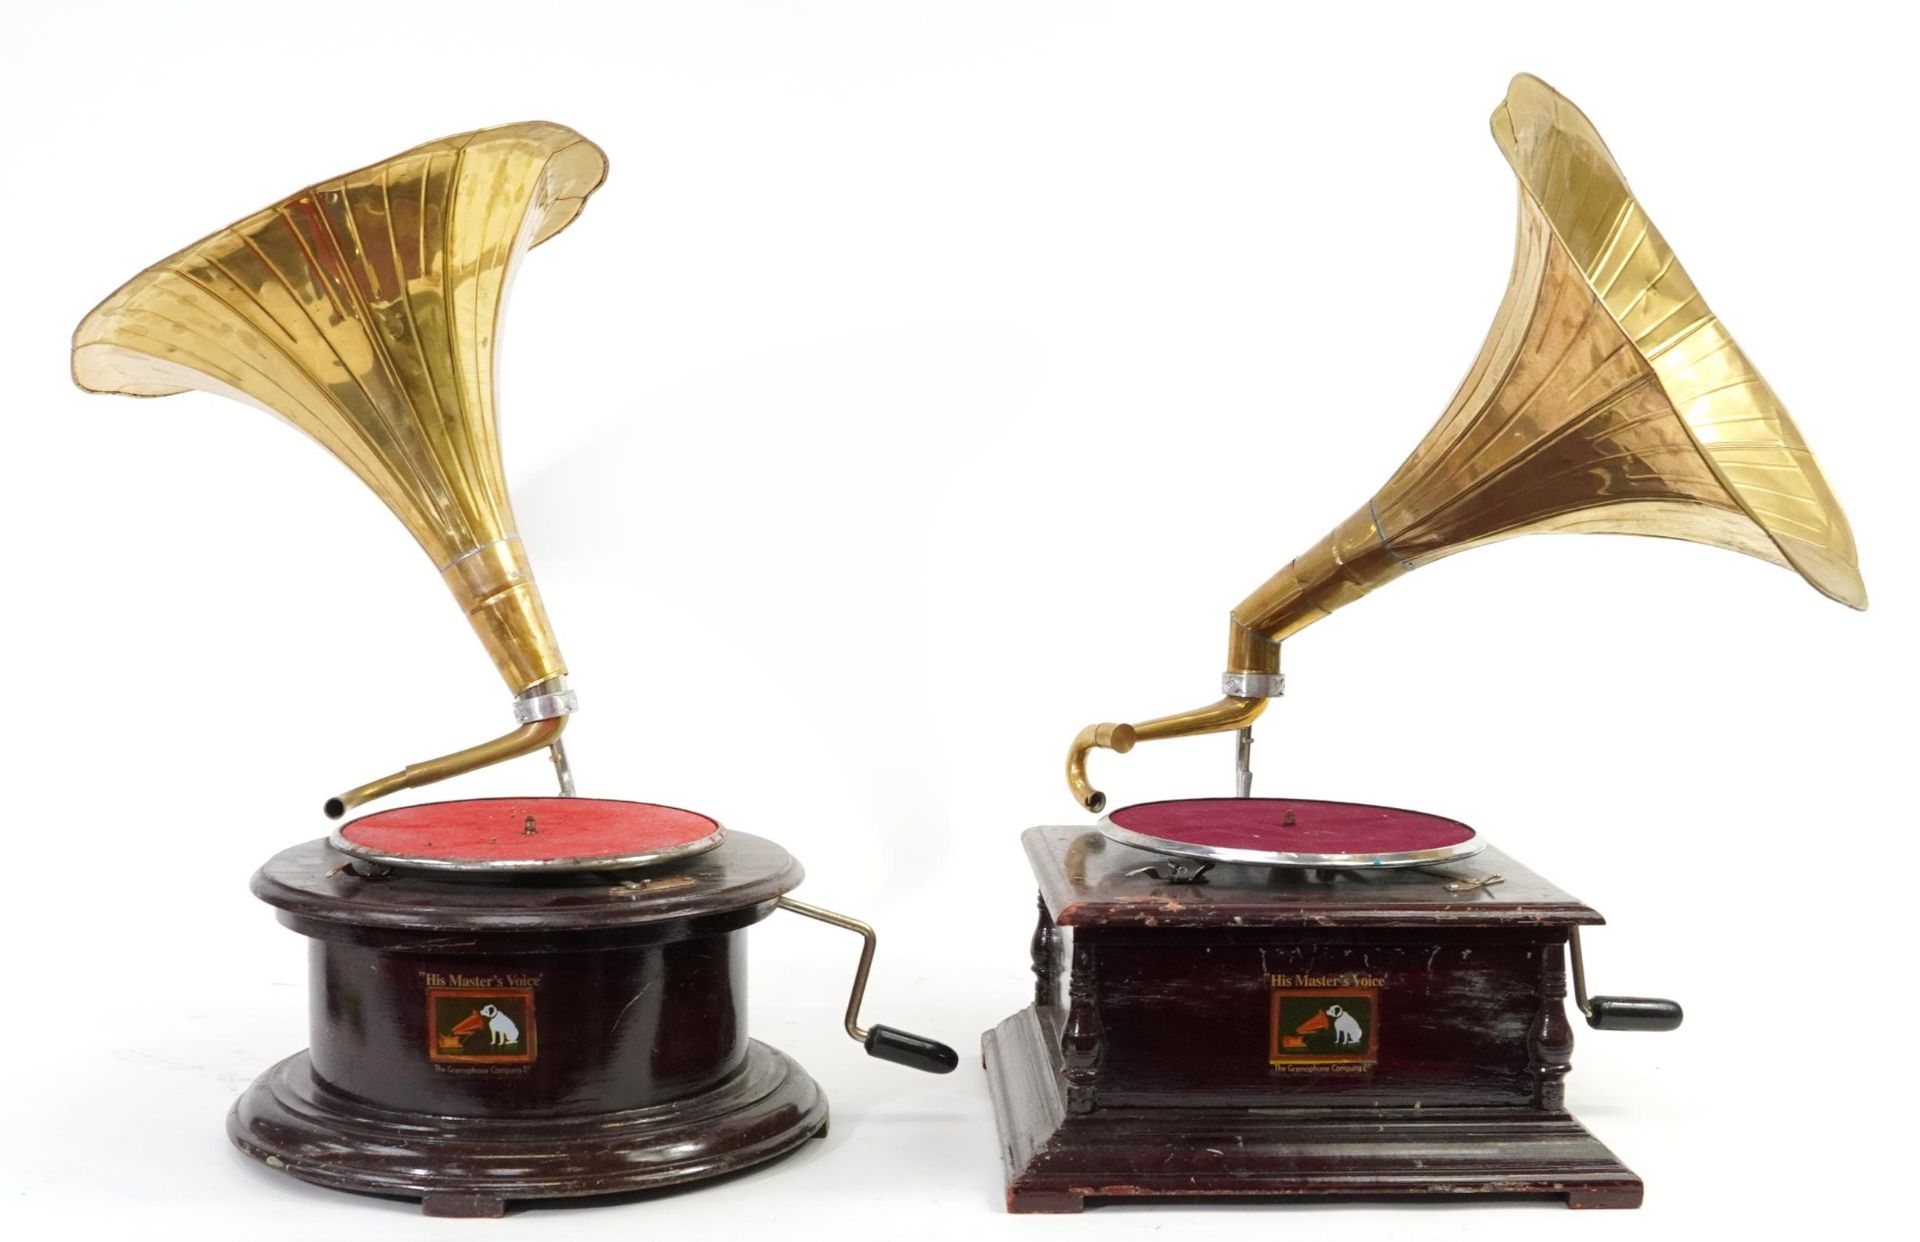 Two mahogany cased His Master's Voice gramophones with brass horns : For further information on this